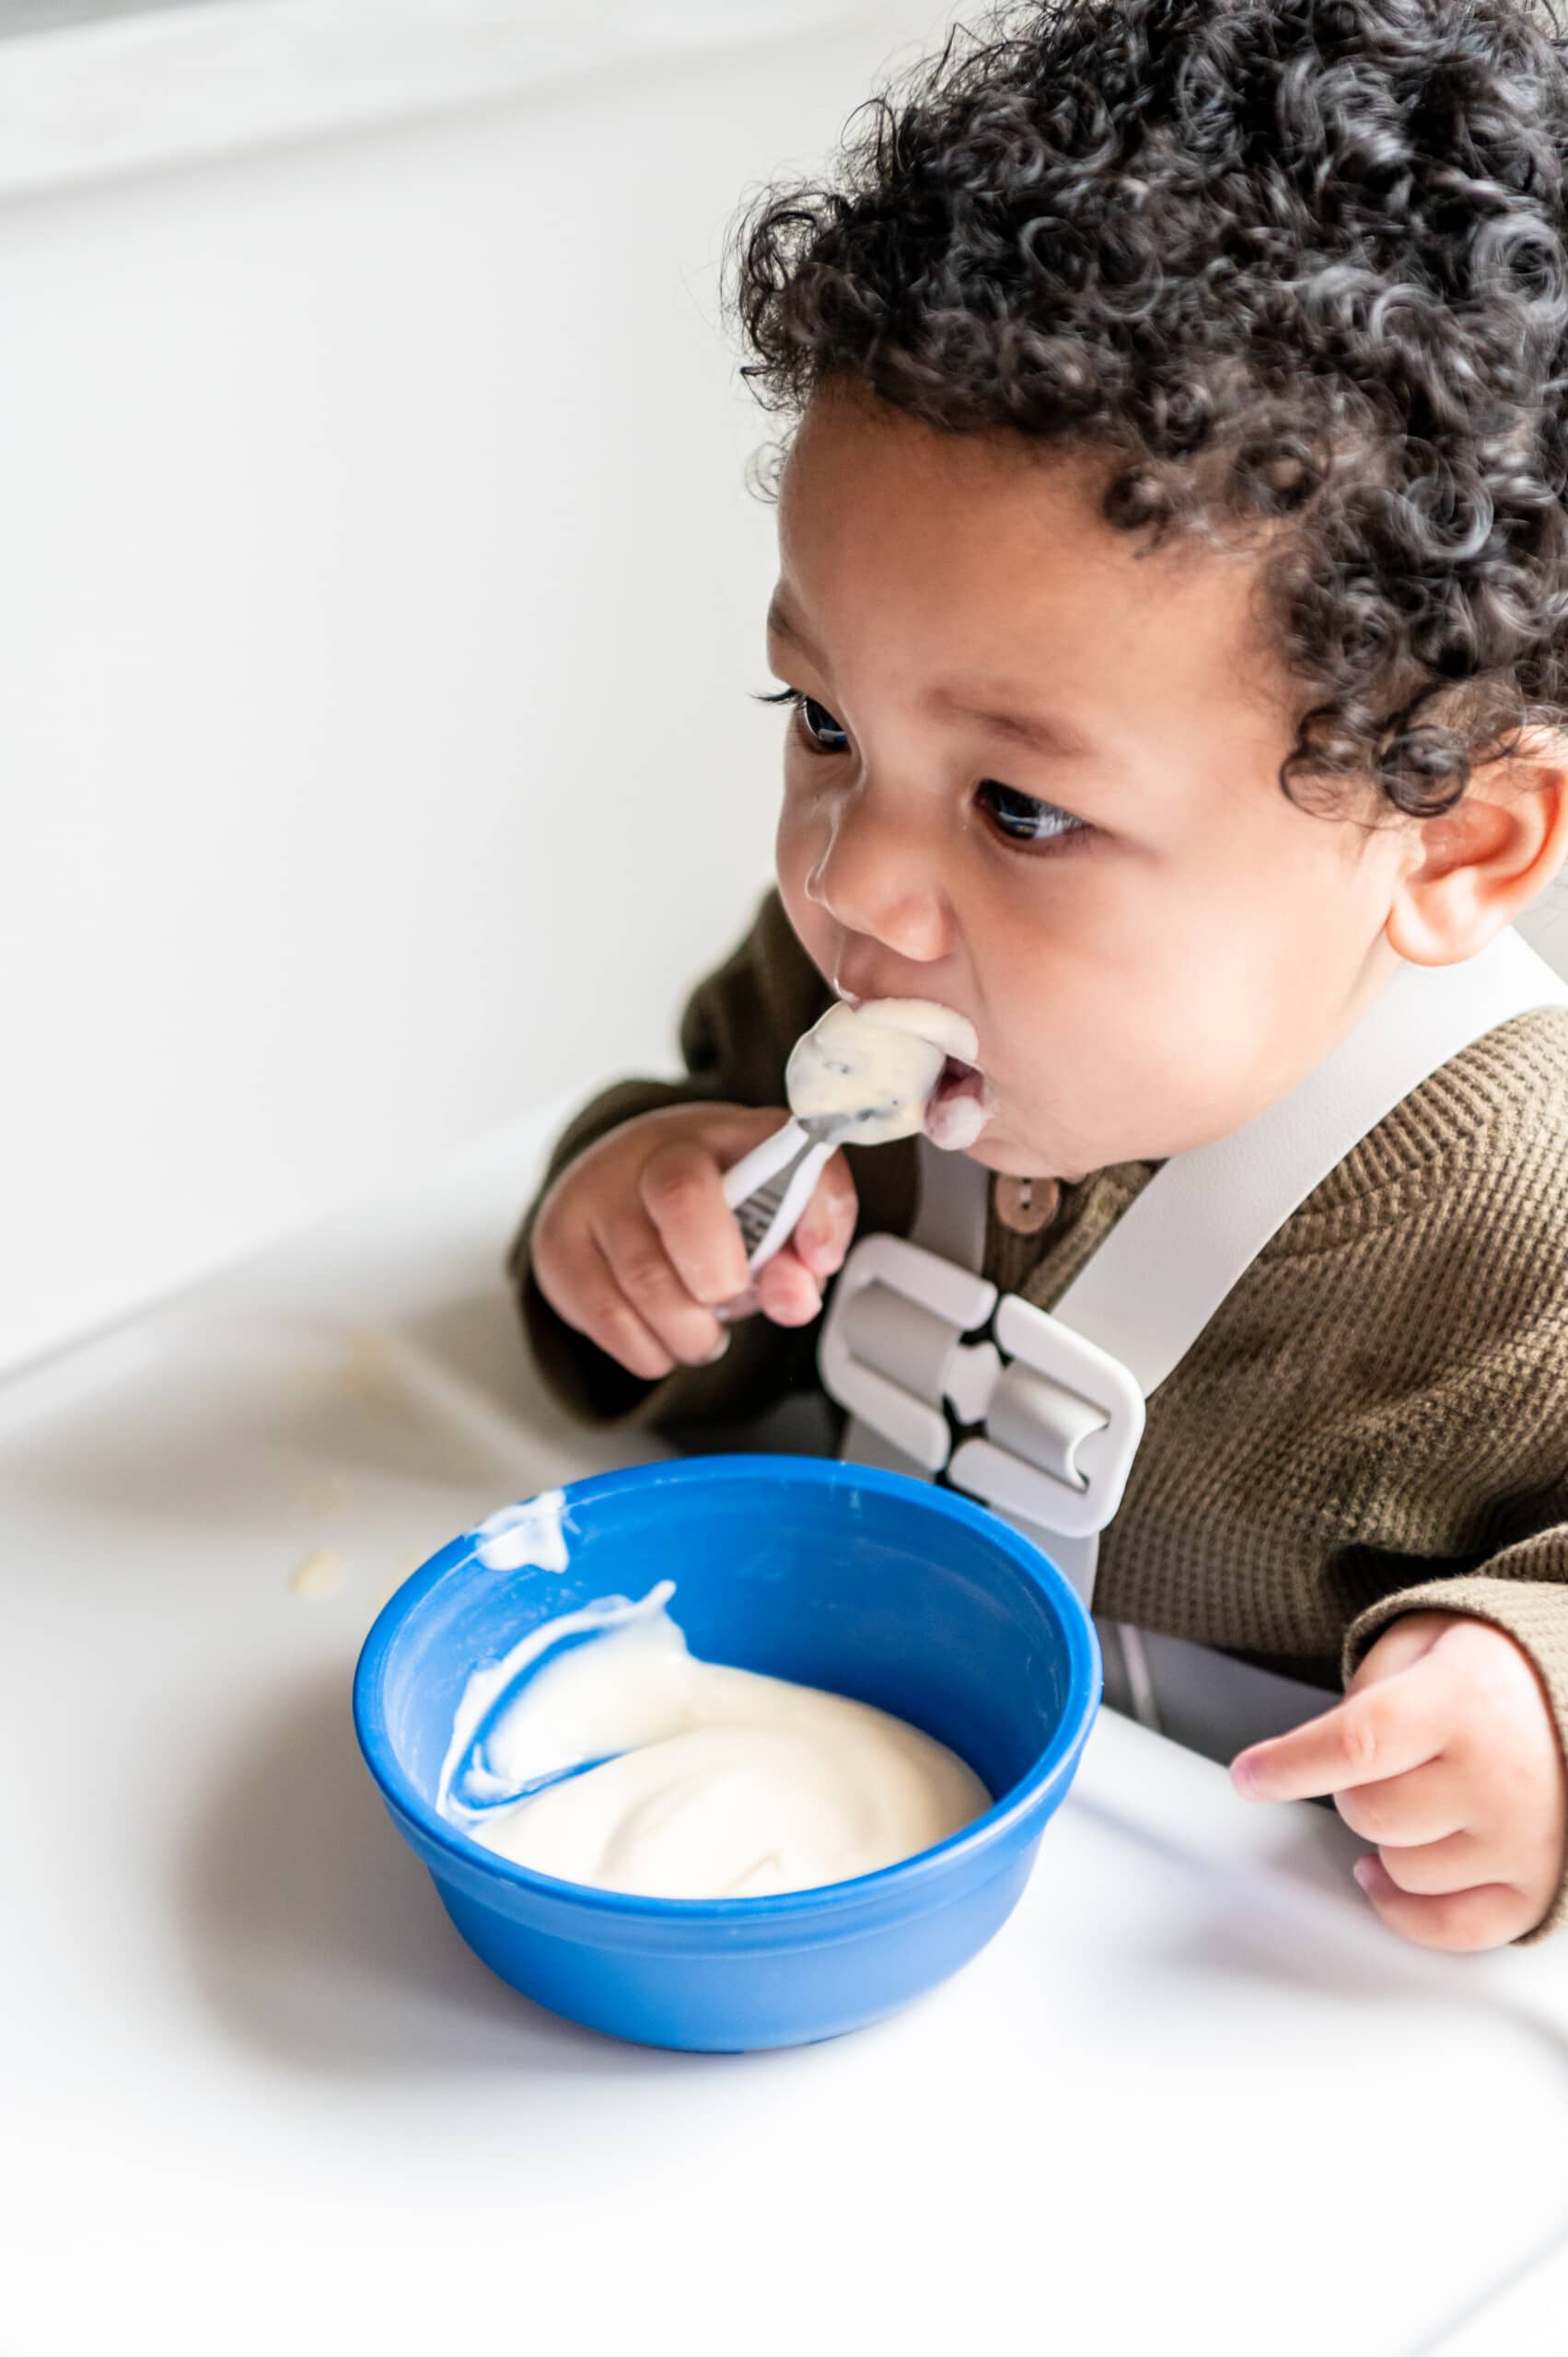 Baby boy eating yogurt from a spoon. There's a blue bowl with yogurt.